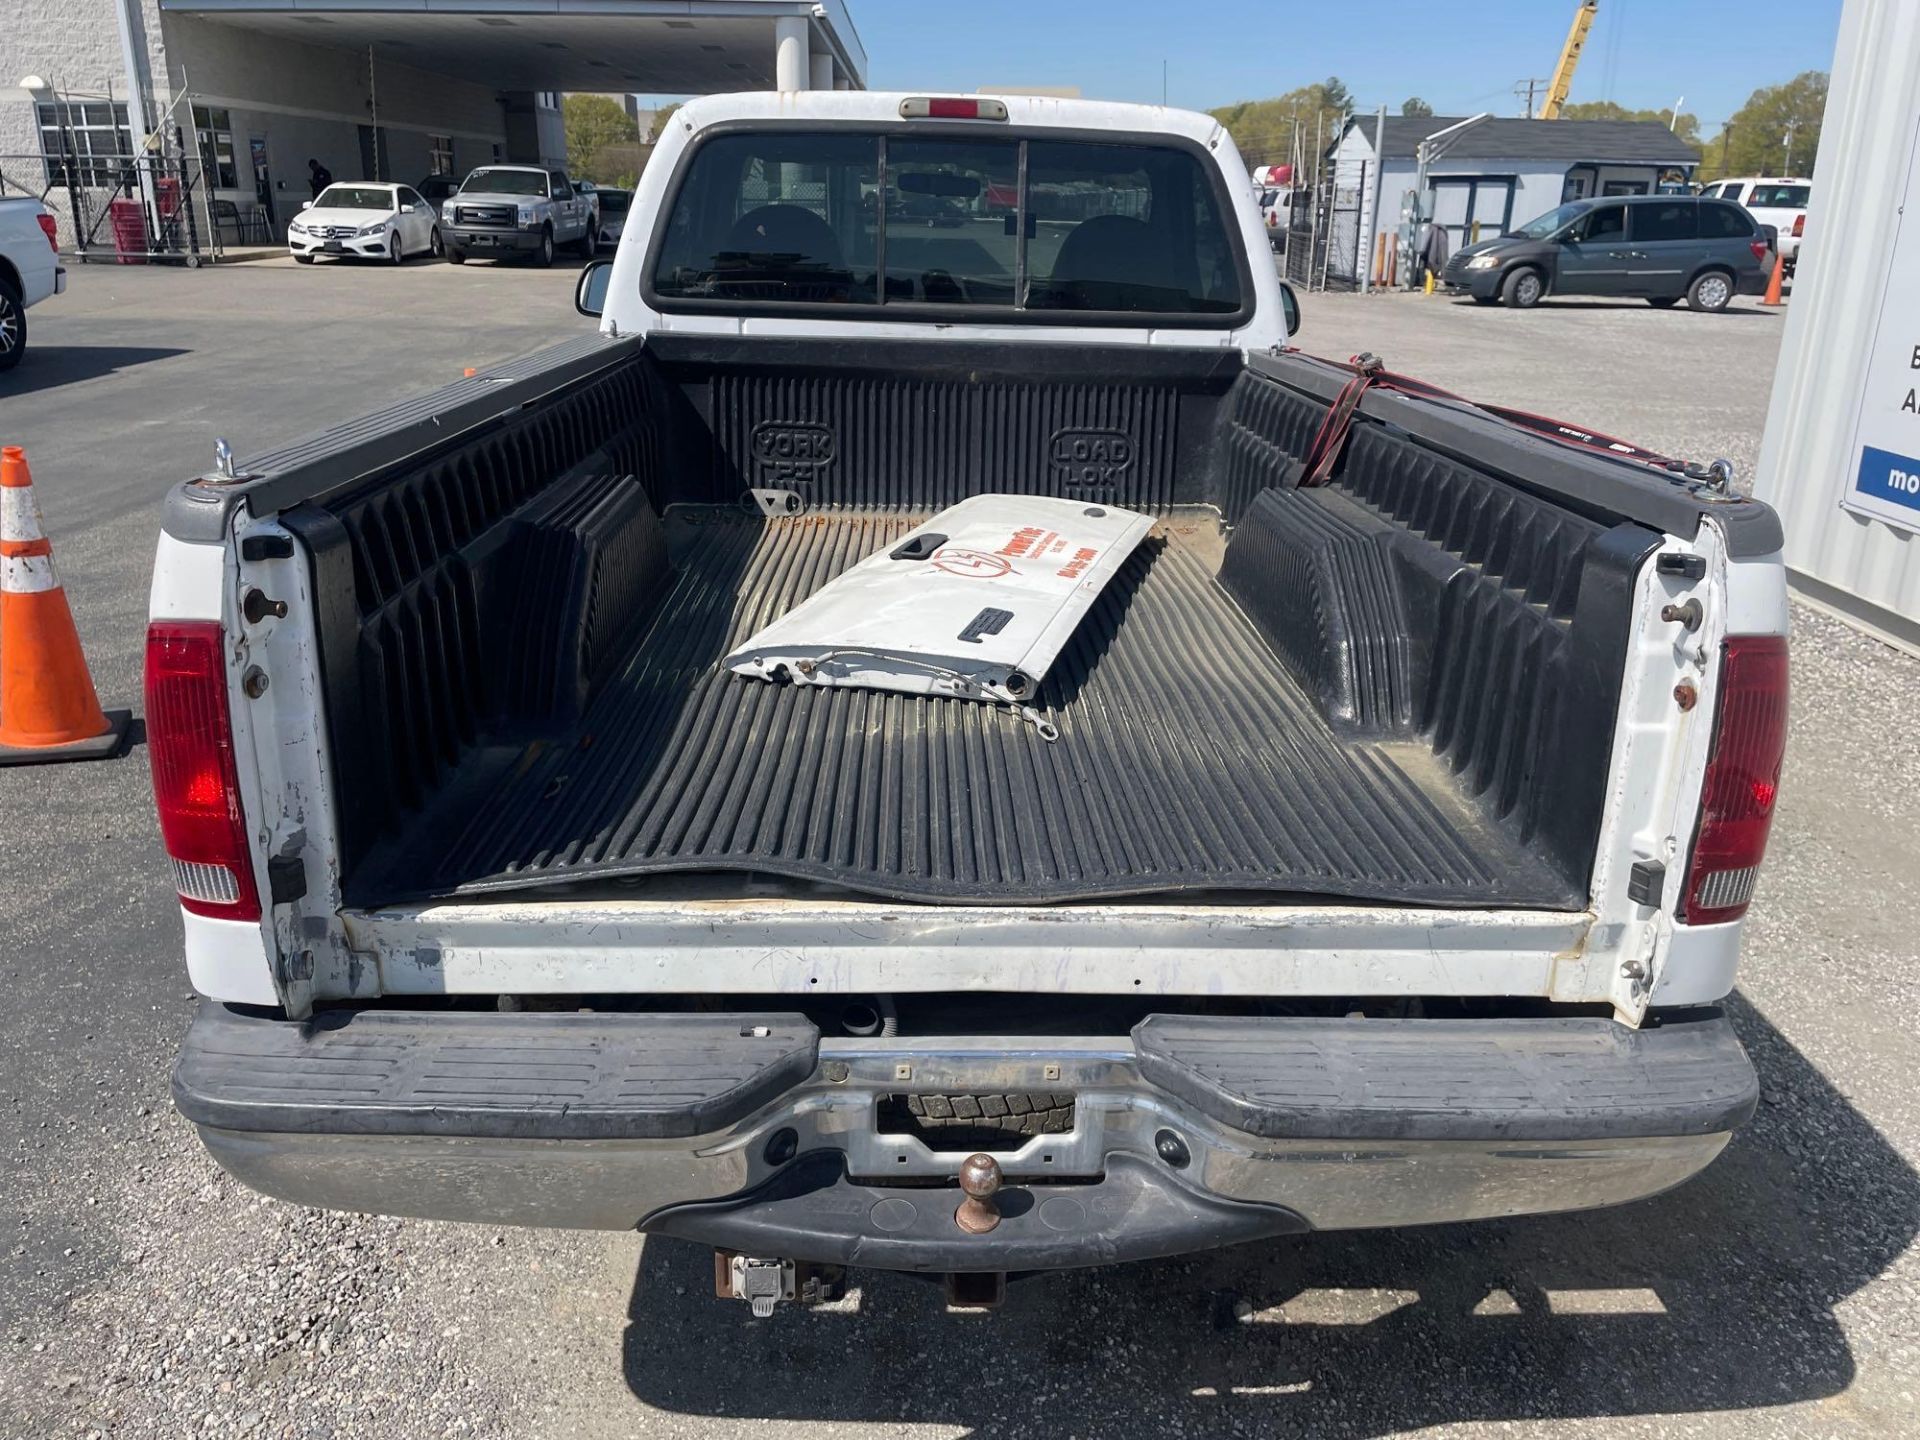 2002 Ford F250 Pickup Truck - Image 18 of 20